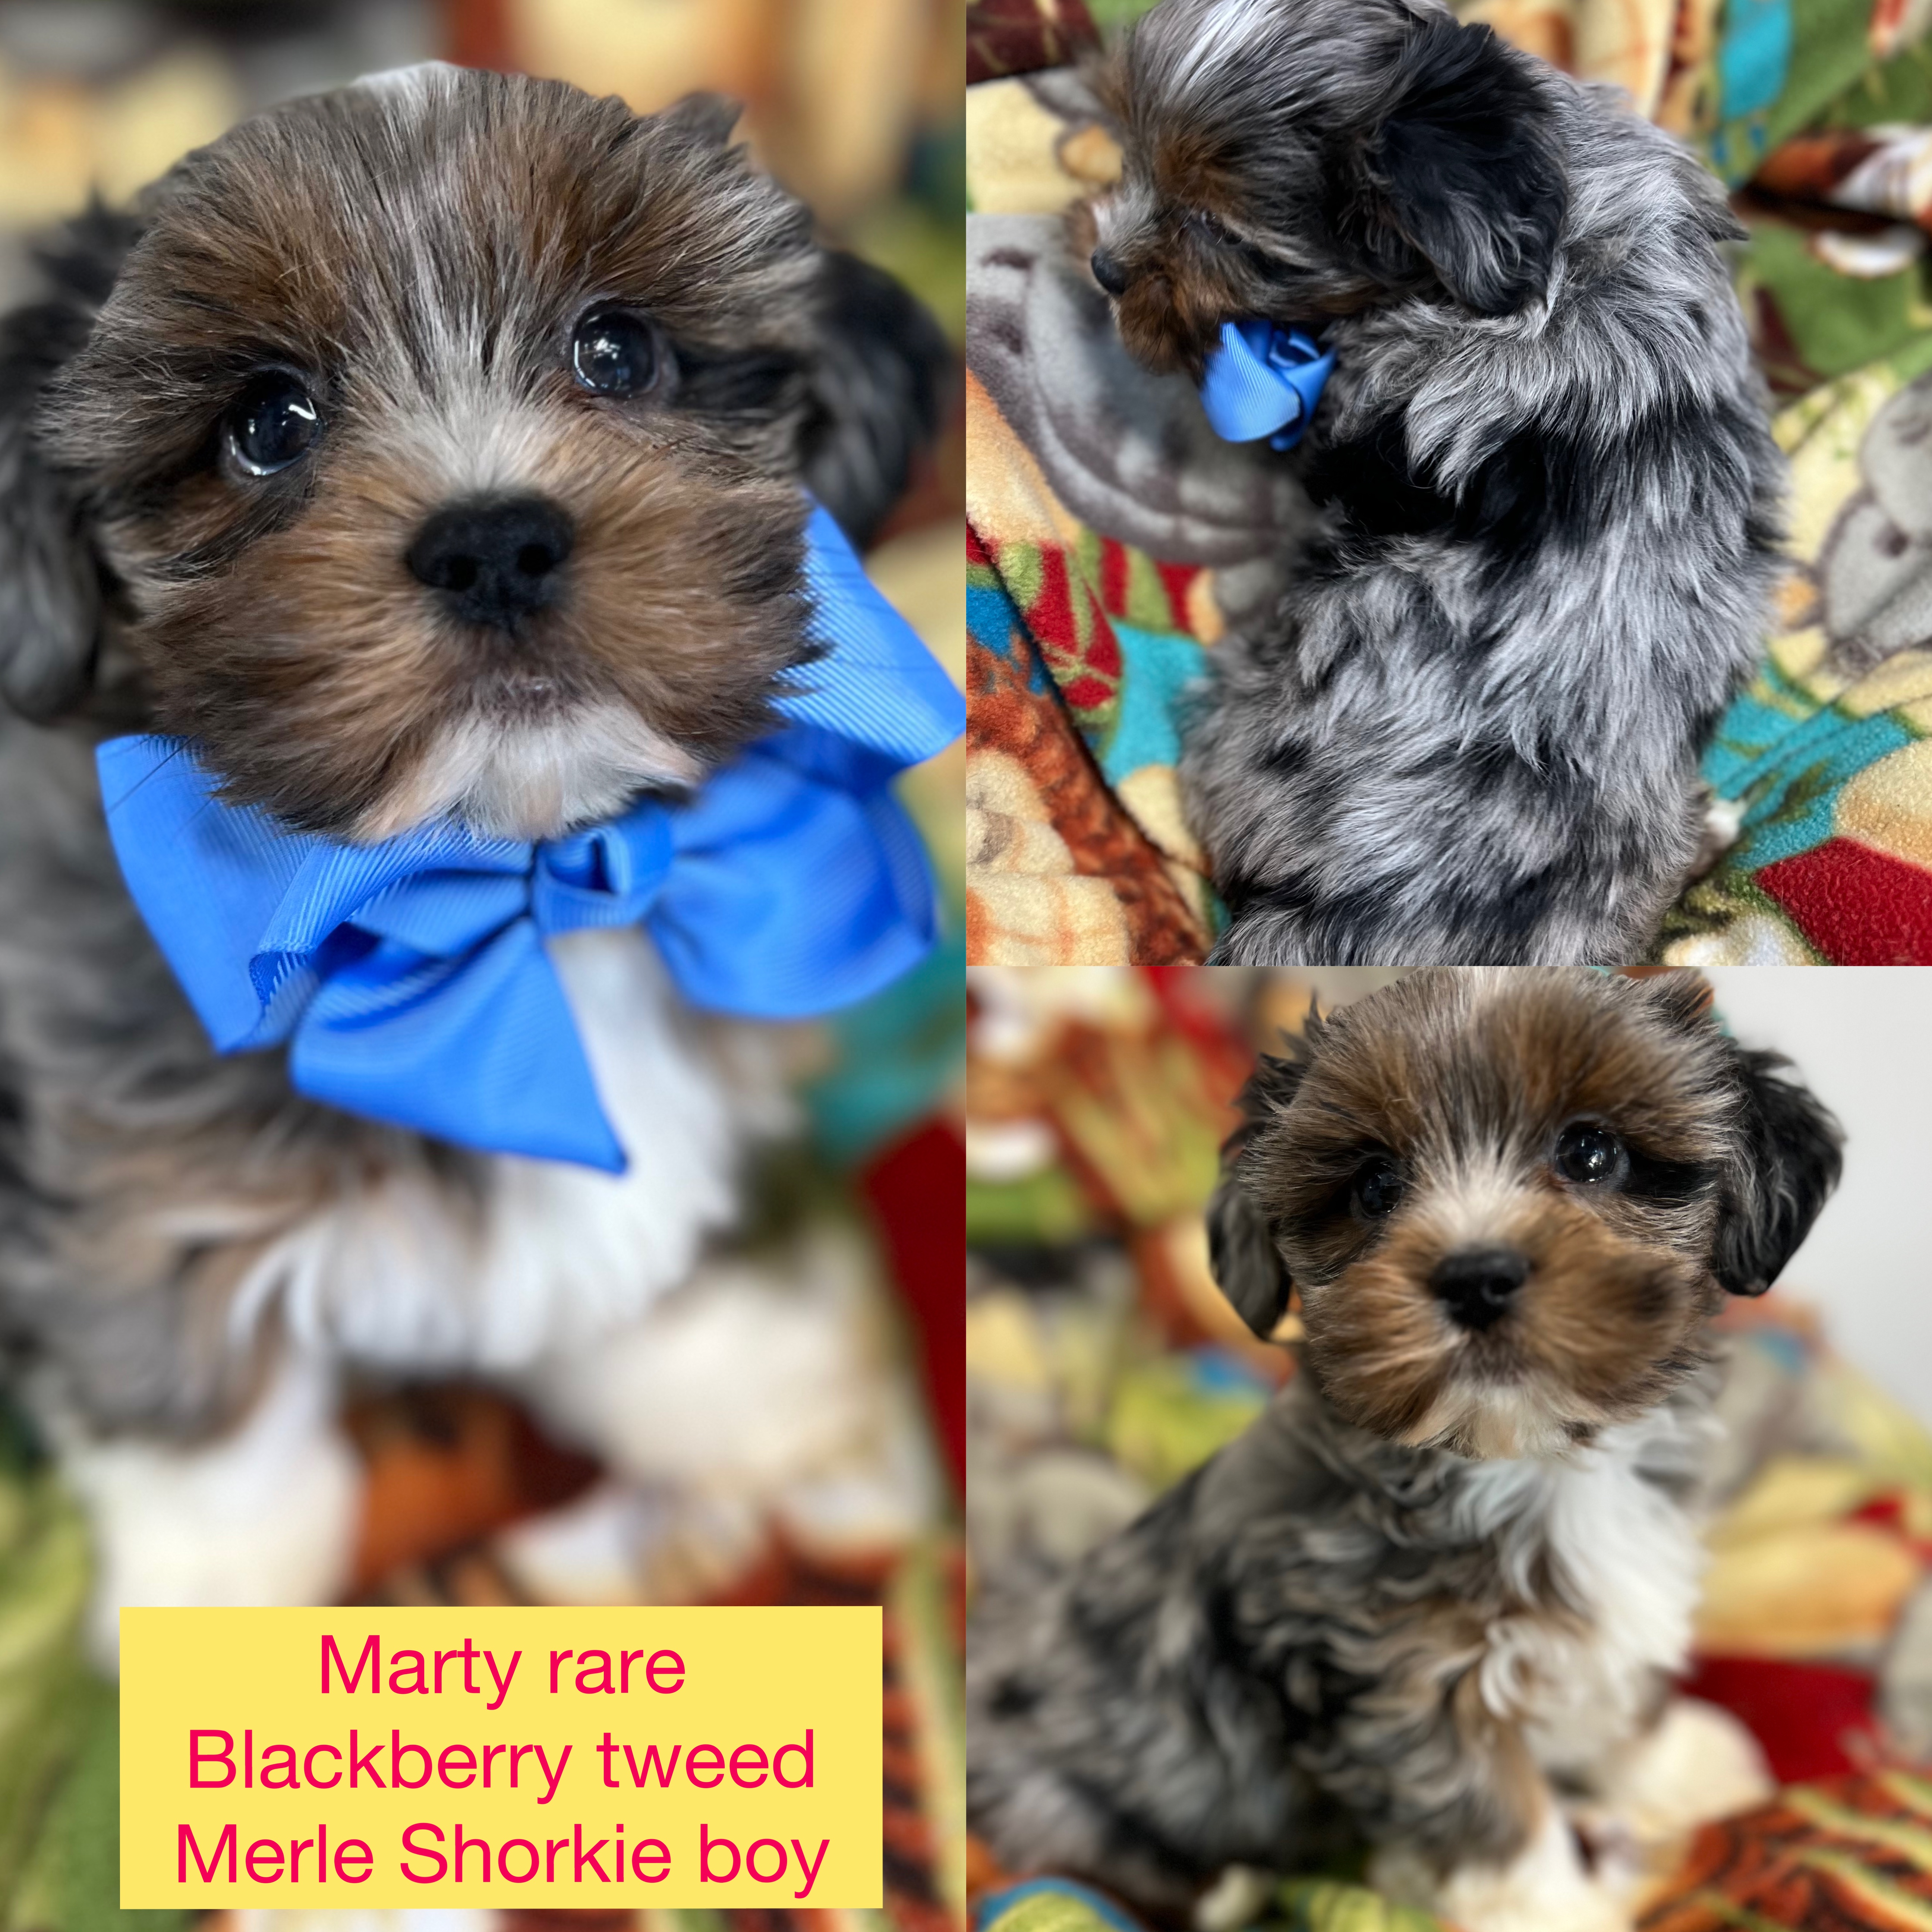 Marty rare blackberry tweed Merle Shorkie boy click pic for info